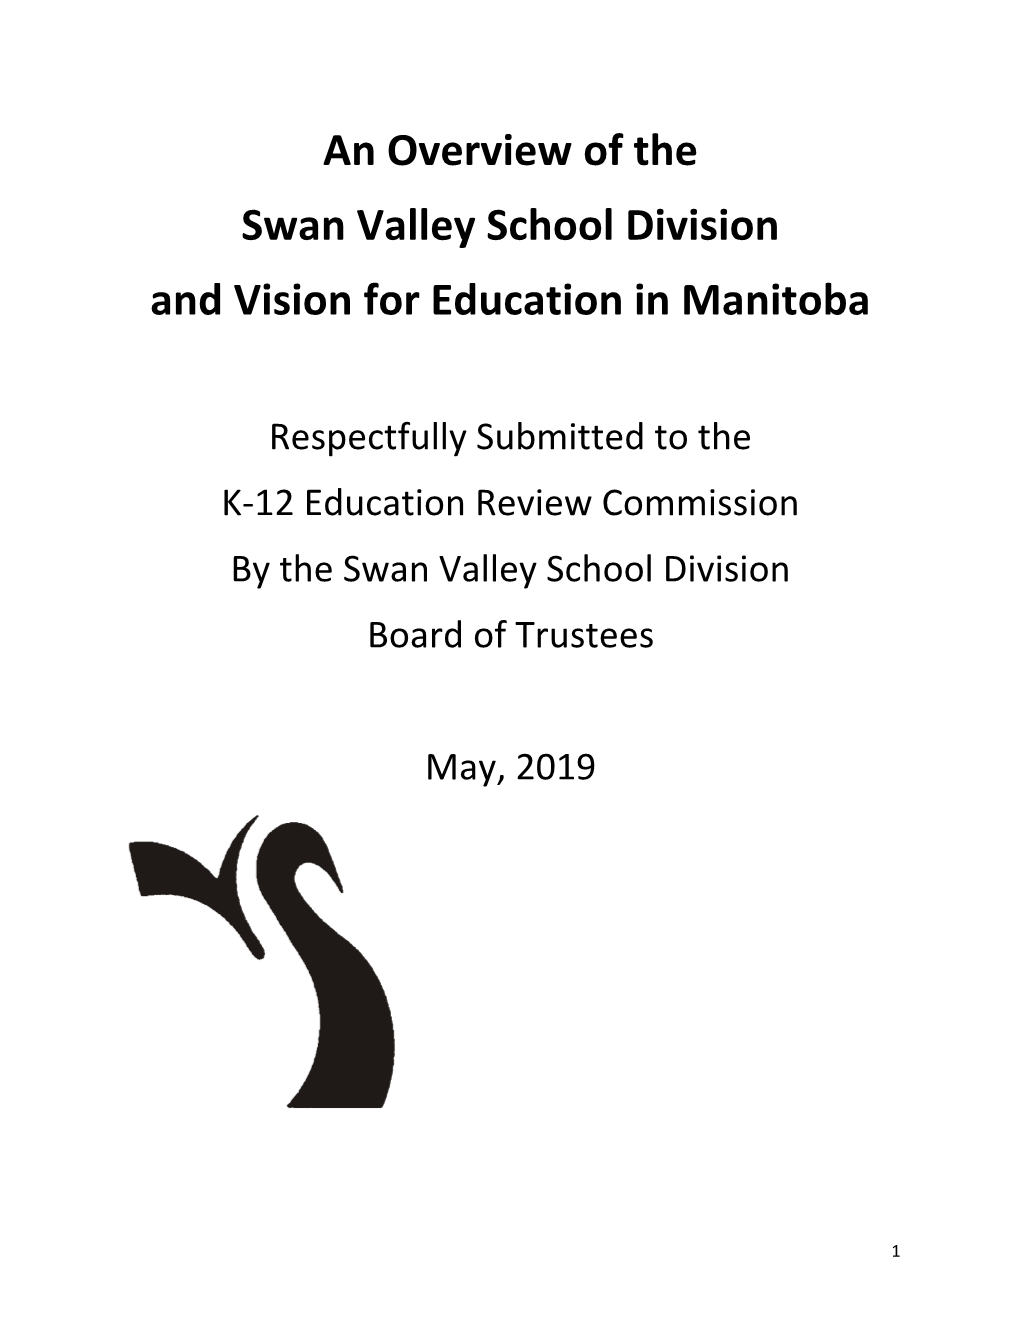 An Overview of the Swan Valley School Division and Vision for Education in Manitoba